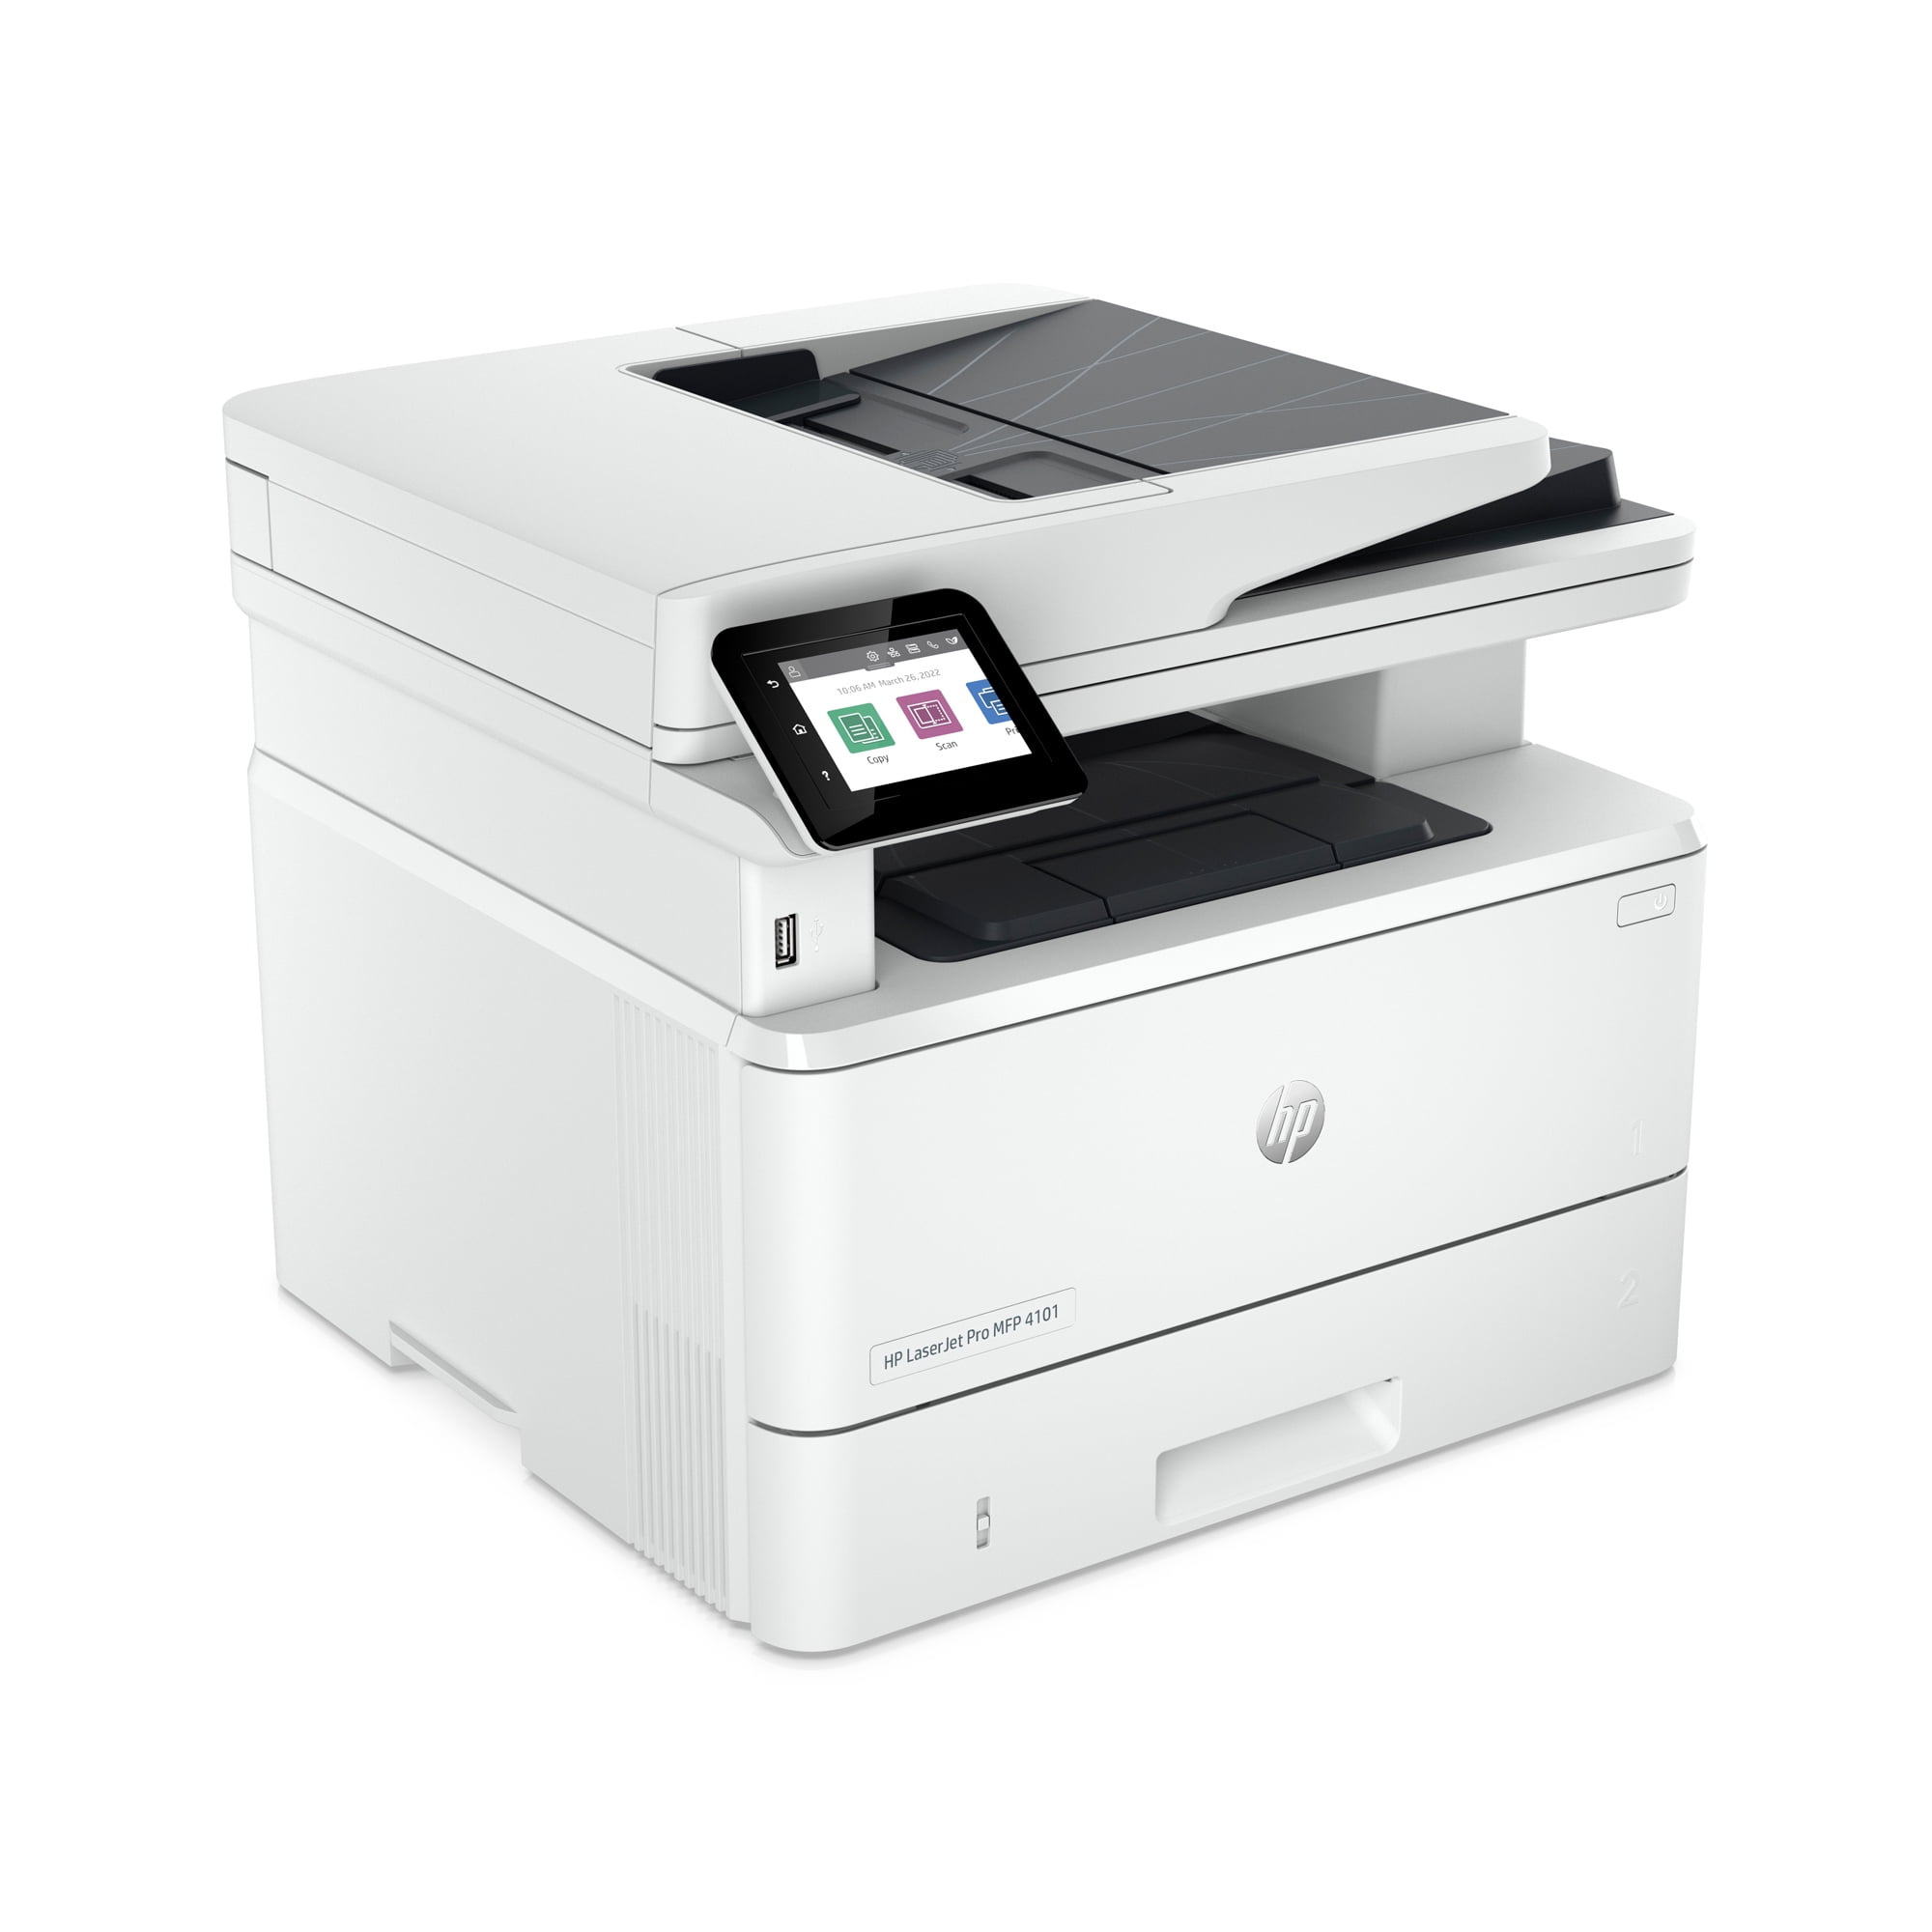 Imprimante multifonction HP Officejet Pro 9019e All-in-One HP+ A4 imprimante,  photocopieur, fax, scanner HP Instant Ink – Conrad Electronic Suisse